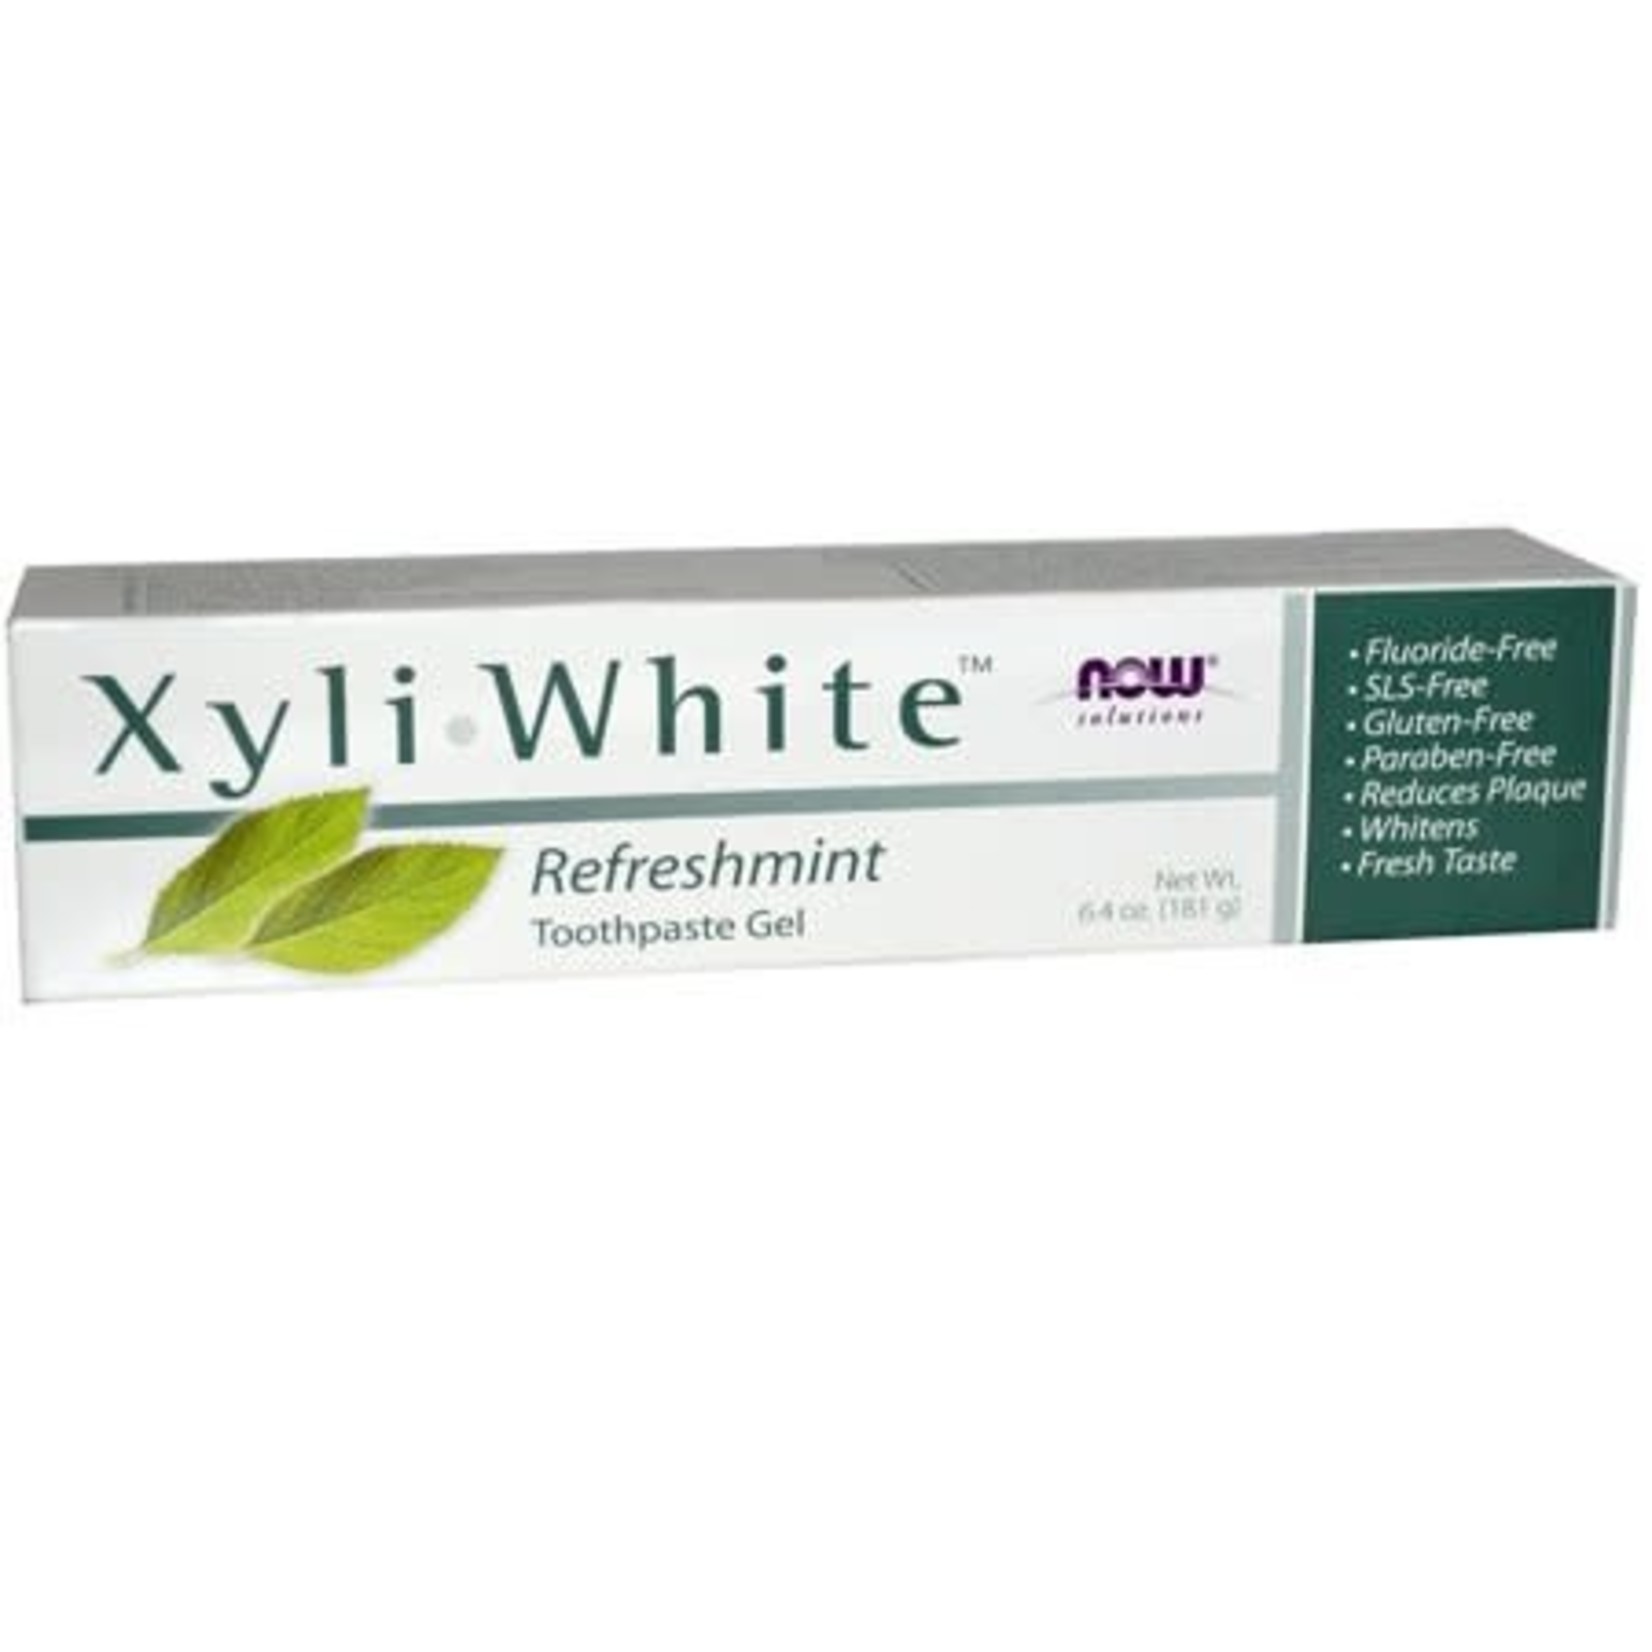 Now XyliWhite Refreshmint Toothpaste